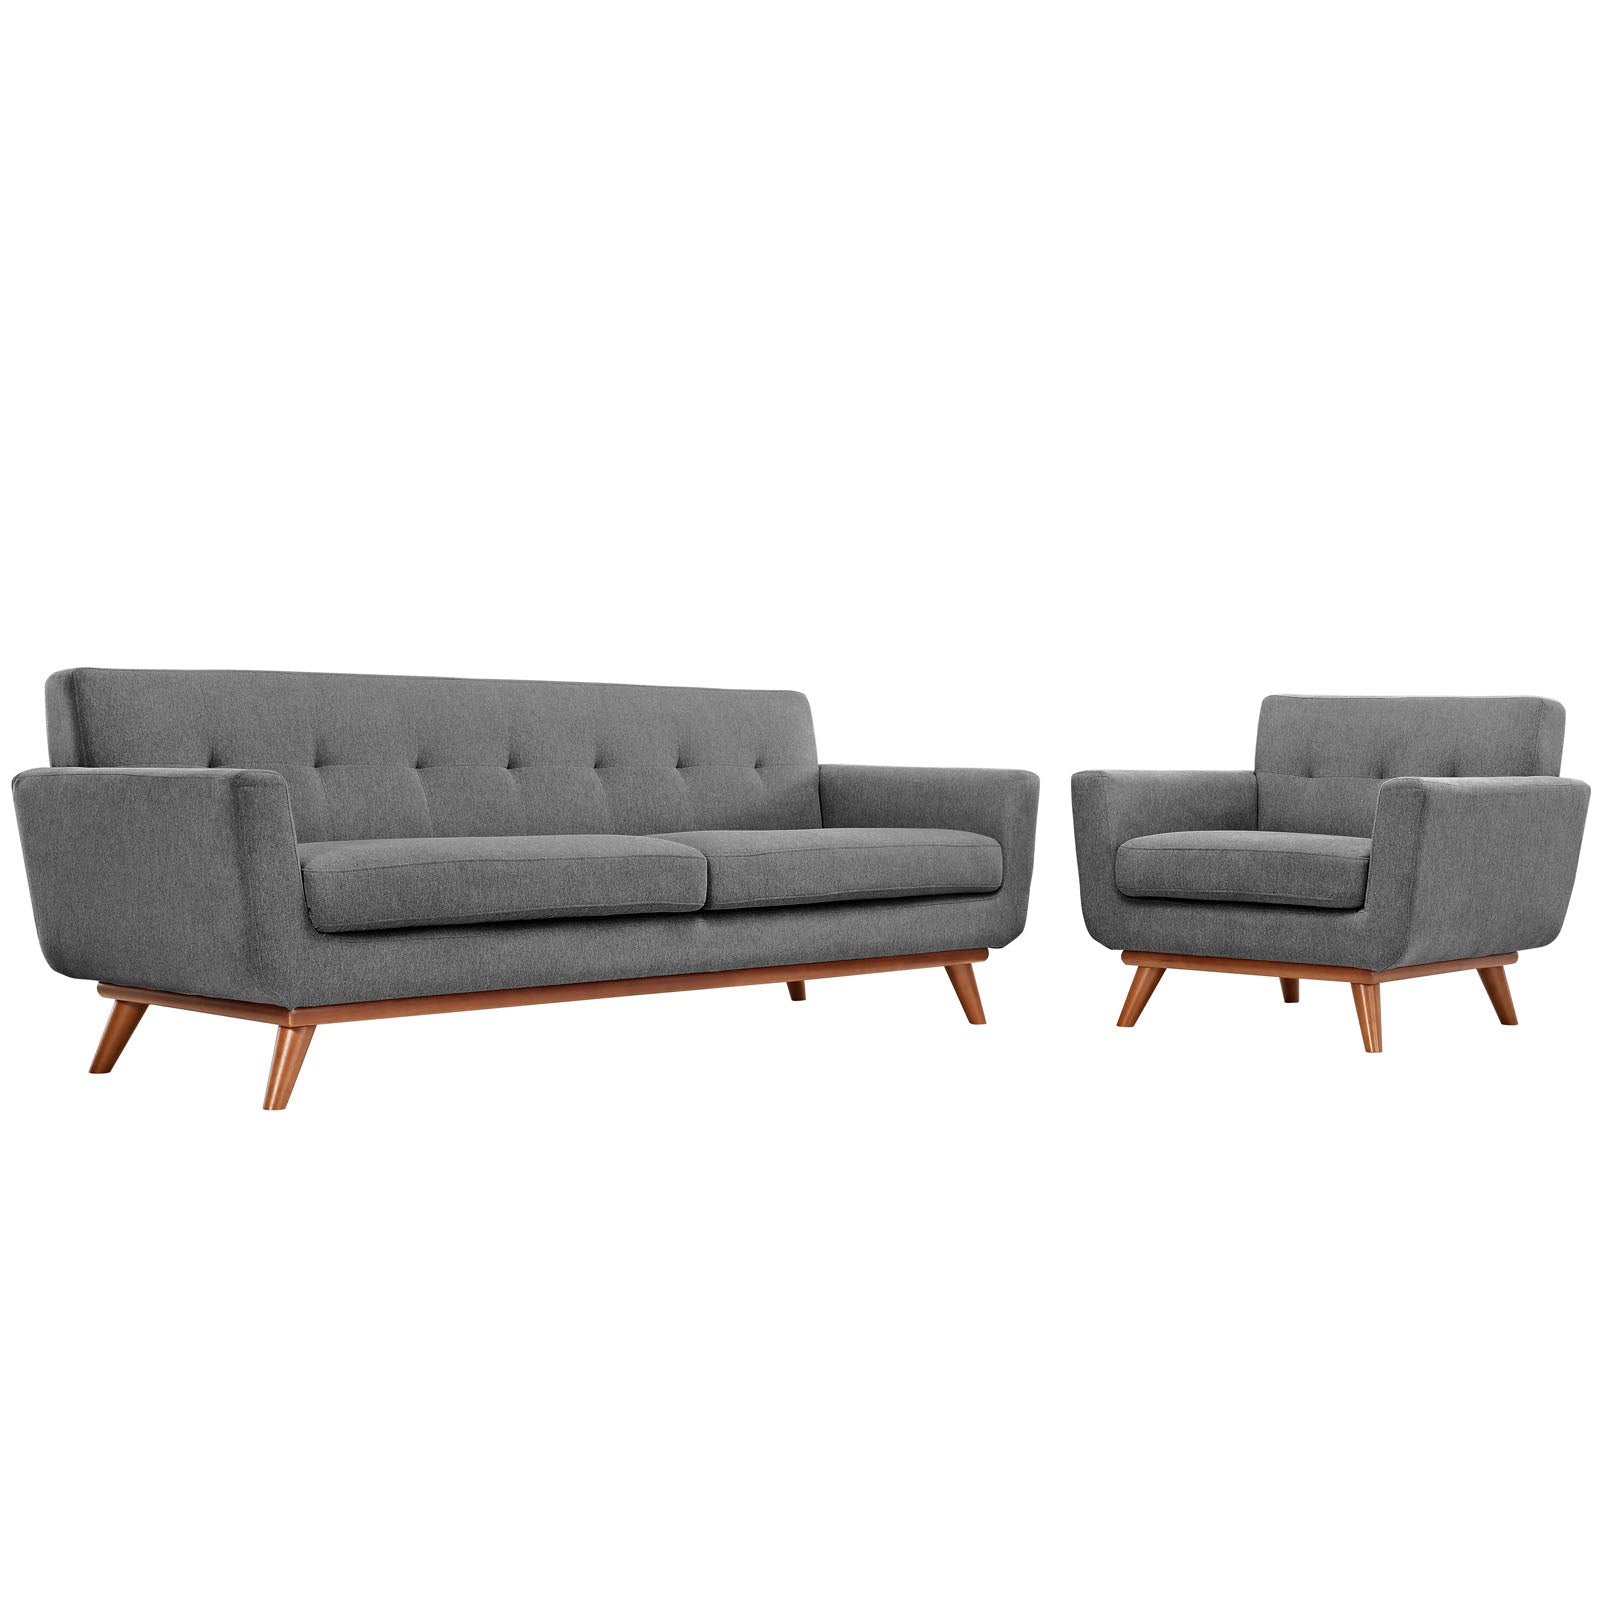 Engage Armchair and Sofa Set of 2 - East Shore Modern Home Furnishings